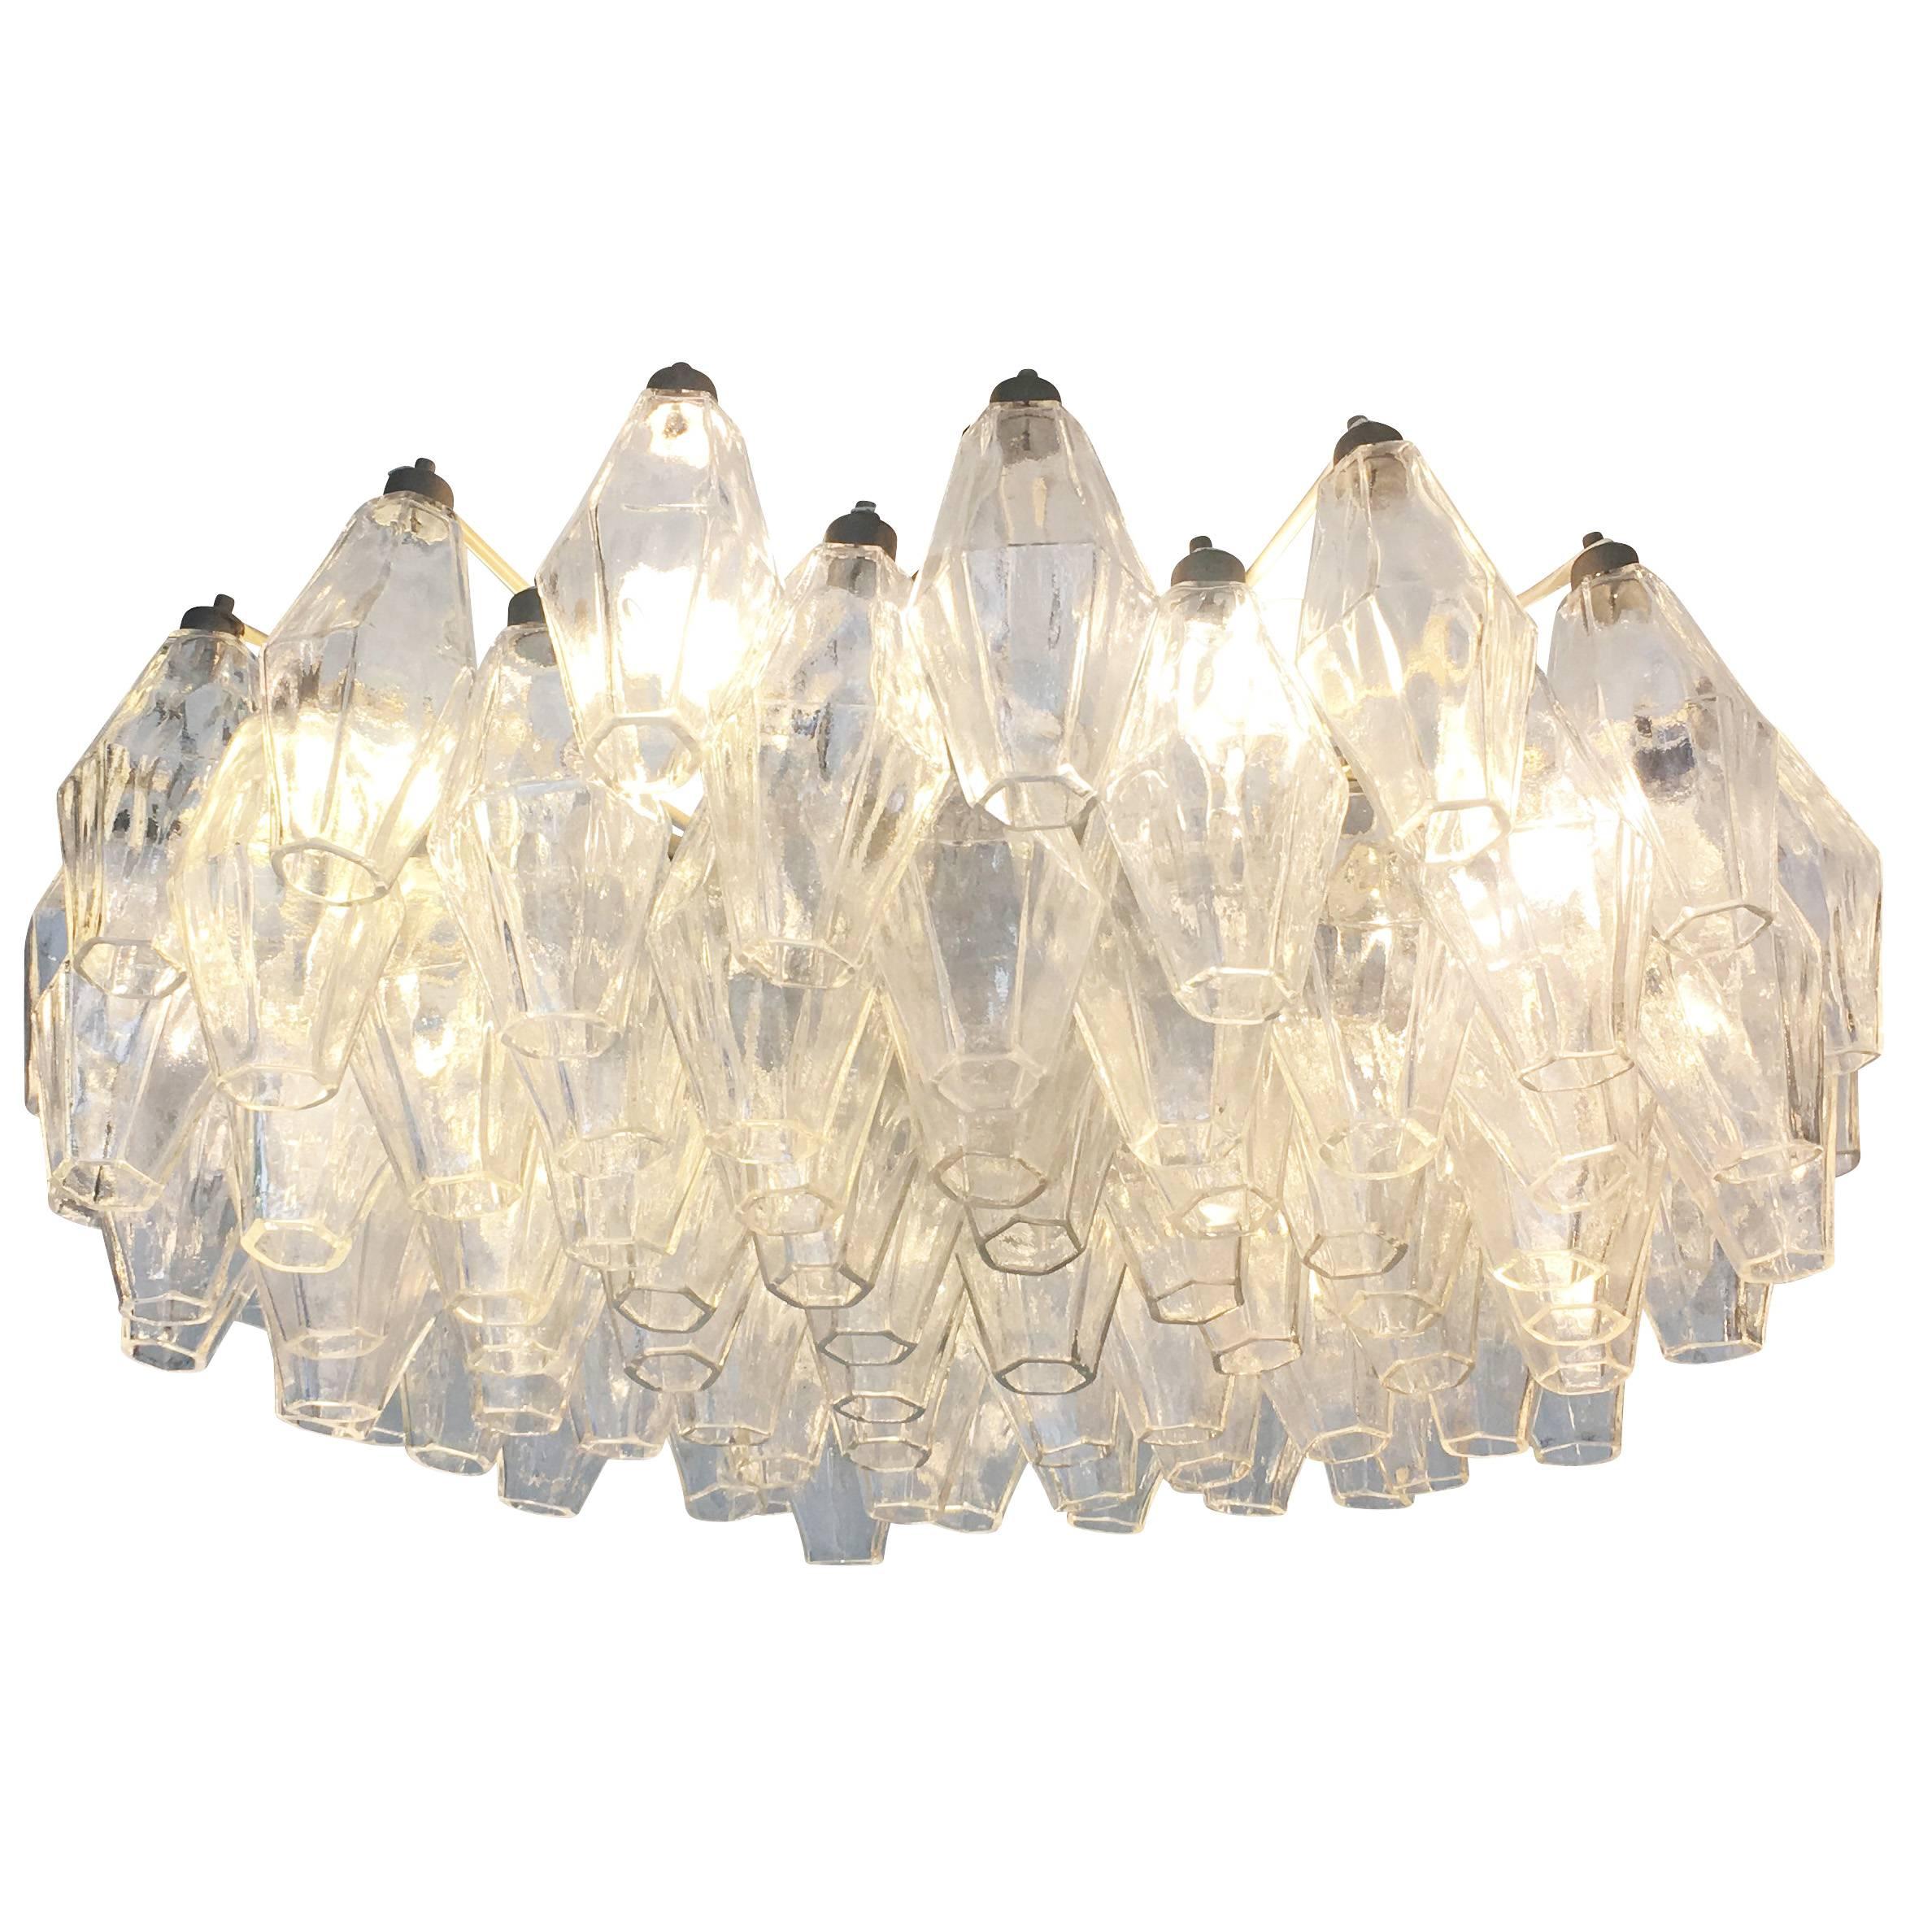 Original polyhedral chandelier made by Venini in the 1960s. This timeless Murano fixture has clear hand blown glasses on an off-white frame. Some tinted glasses are available if one wished to add a pop of color. Can be semi-flush mounted or hung on